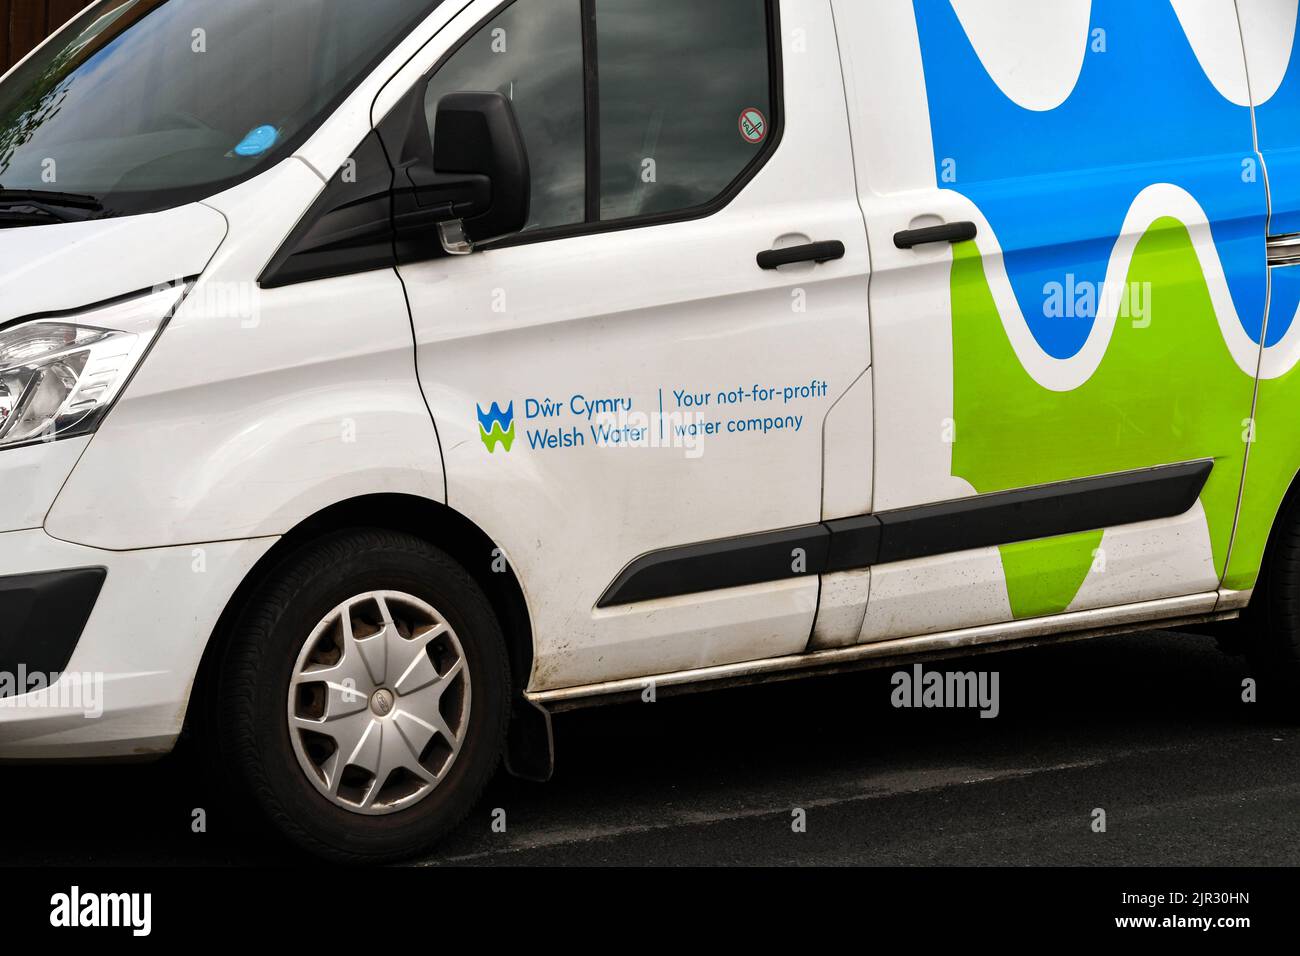 Pontypridd, Wales - August 2022: Van used by not for profit water company Welsh Water Stock Photo